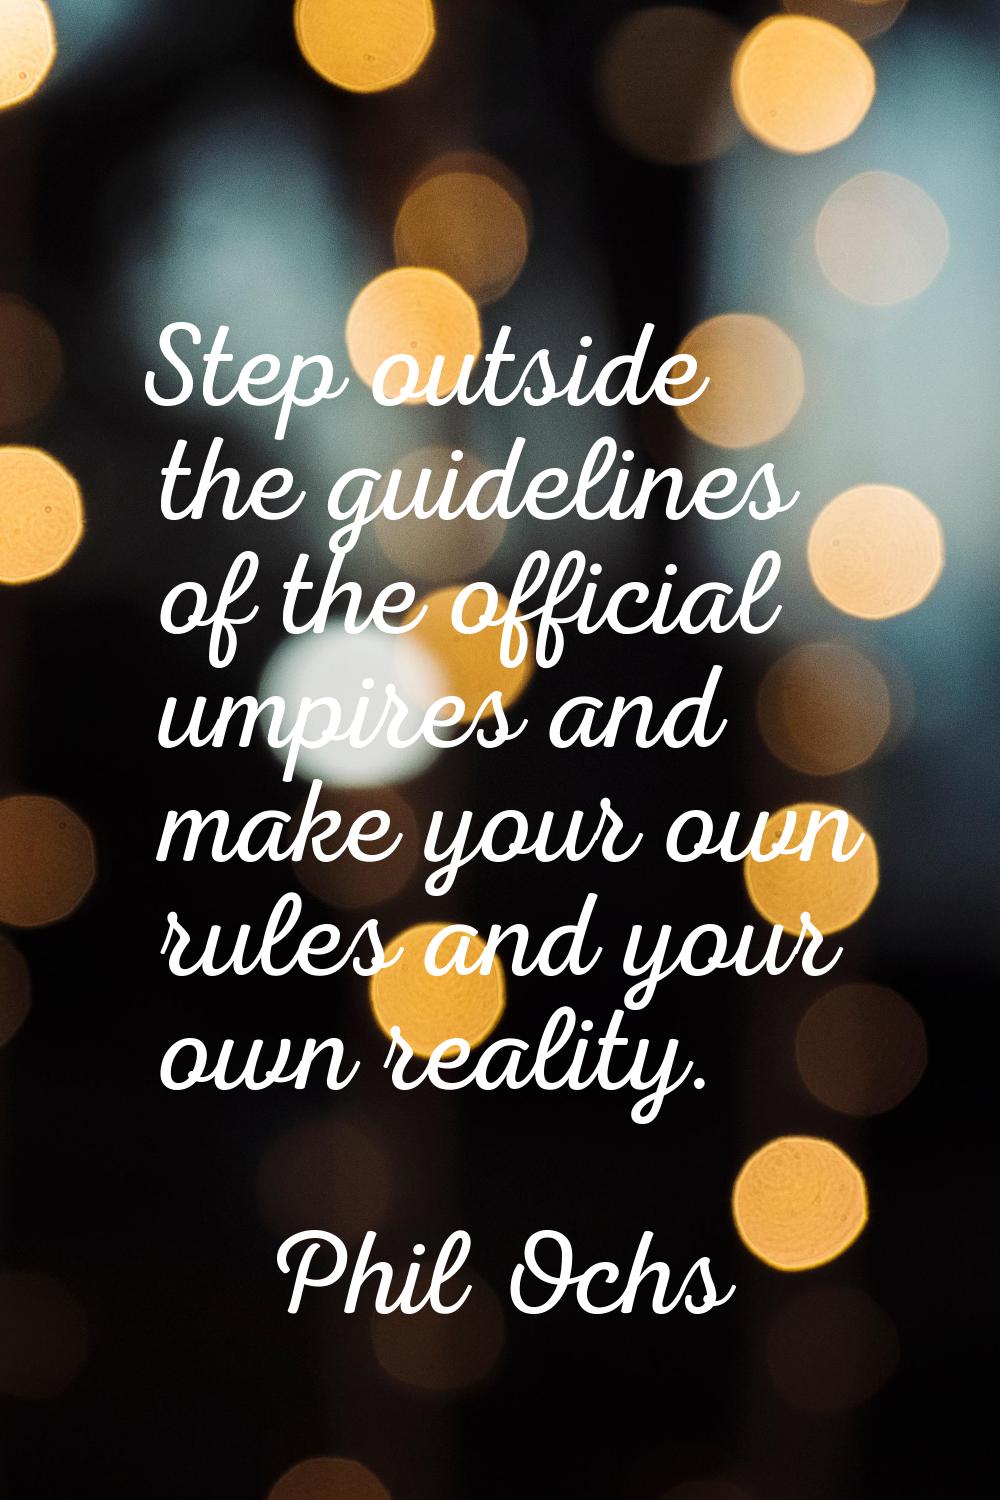 Step outside the guidelines of the official umpires and make your own rules and your own reality.